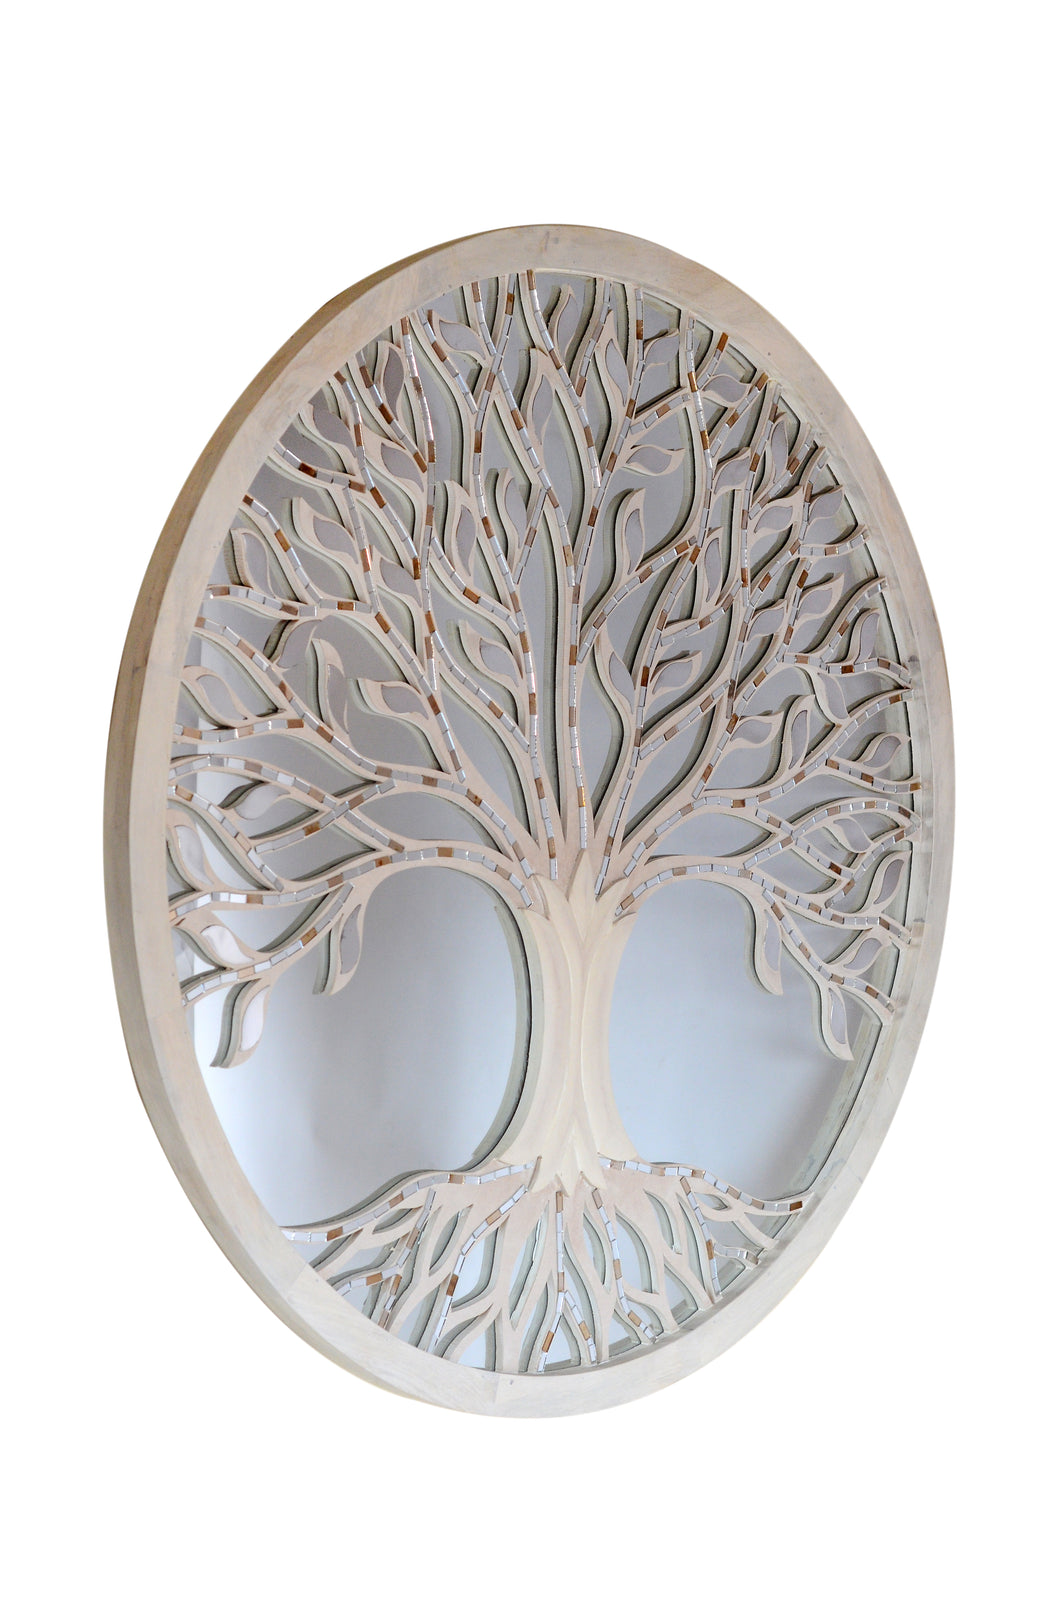 Wooden Tree of Life in Glass Design